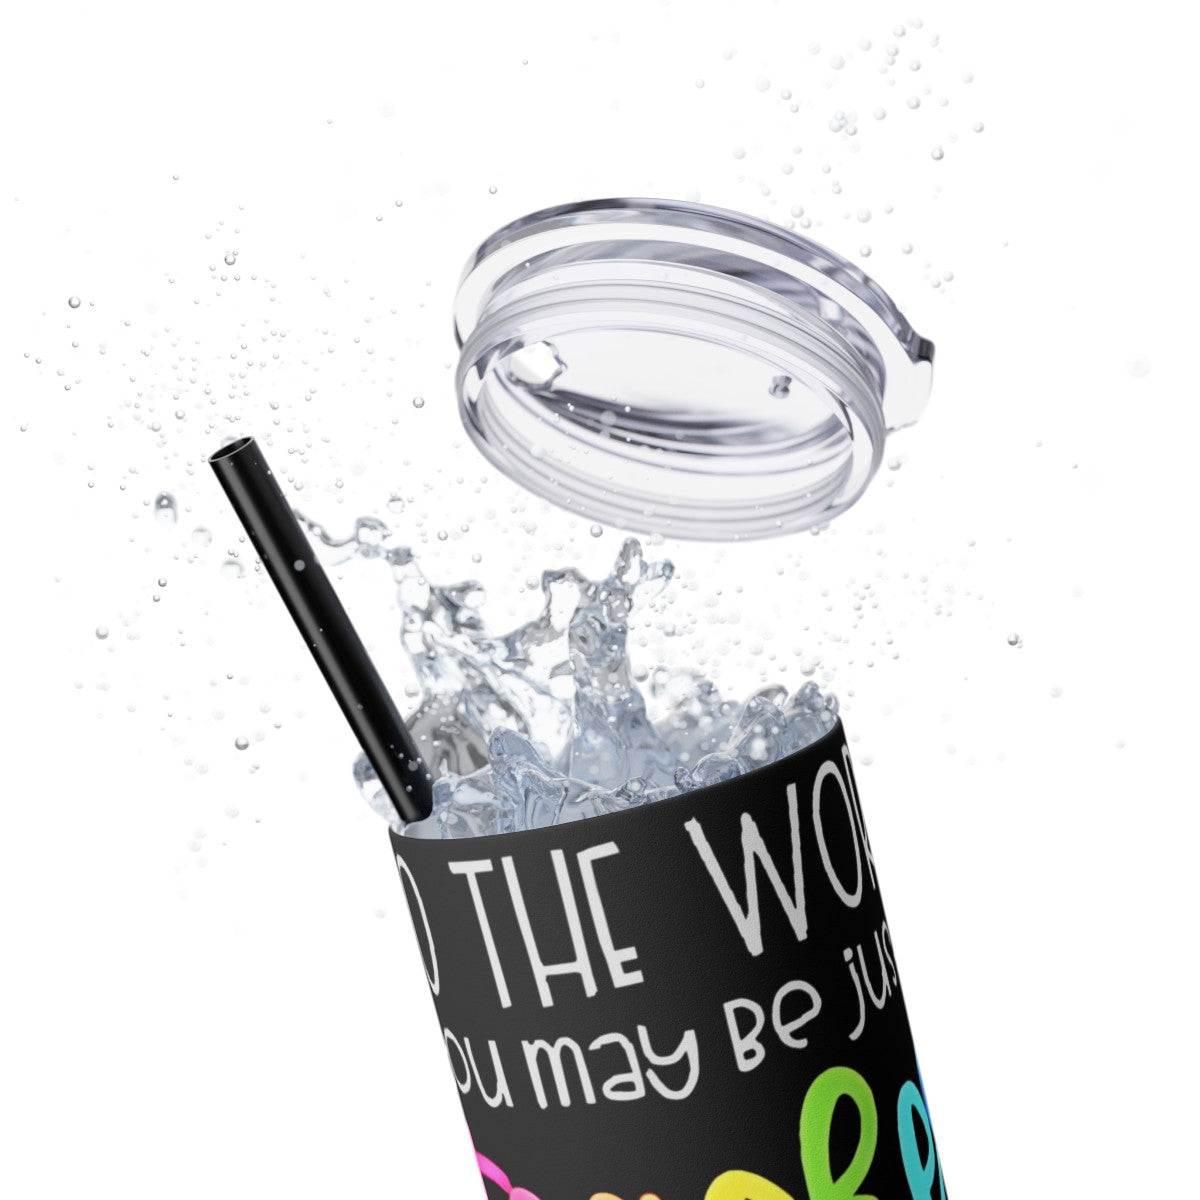 Get trendy with To The World may be just a Teacher Skinny Tumbler with Straw, 20oz -  available at Good Gift Company. Grab yours for $44.20 today!